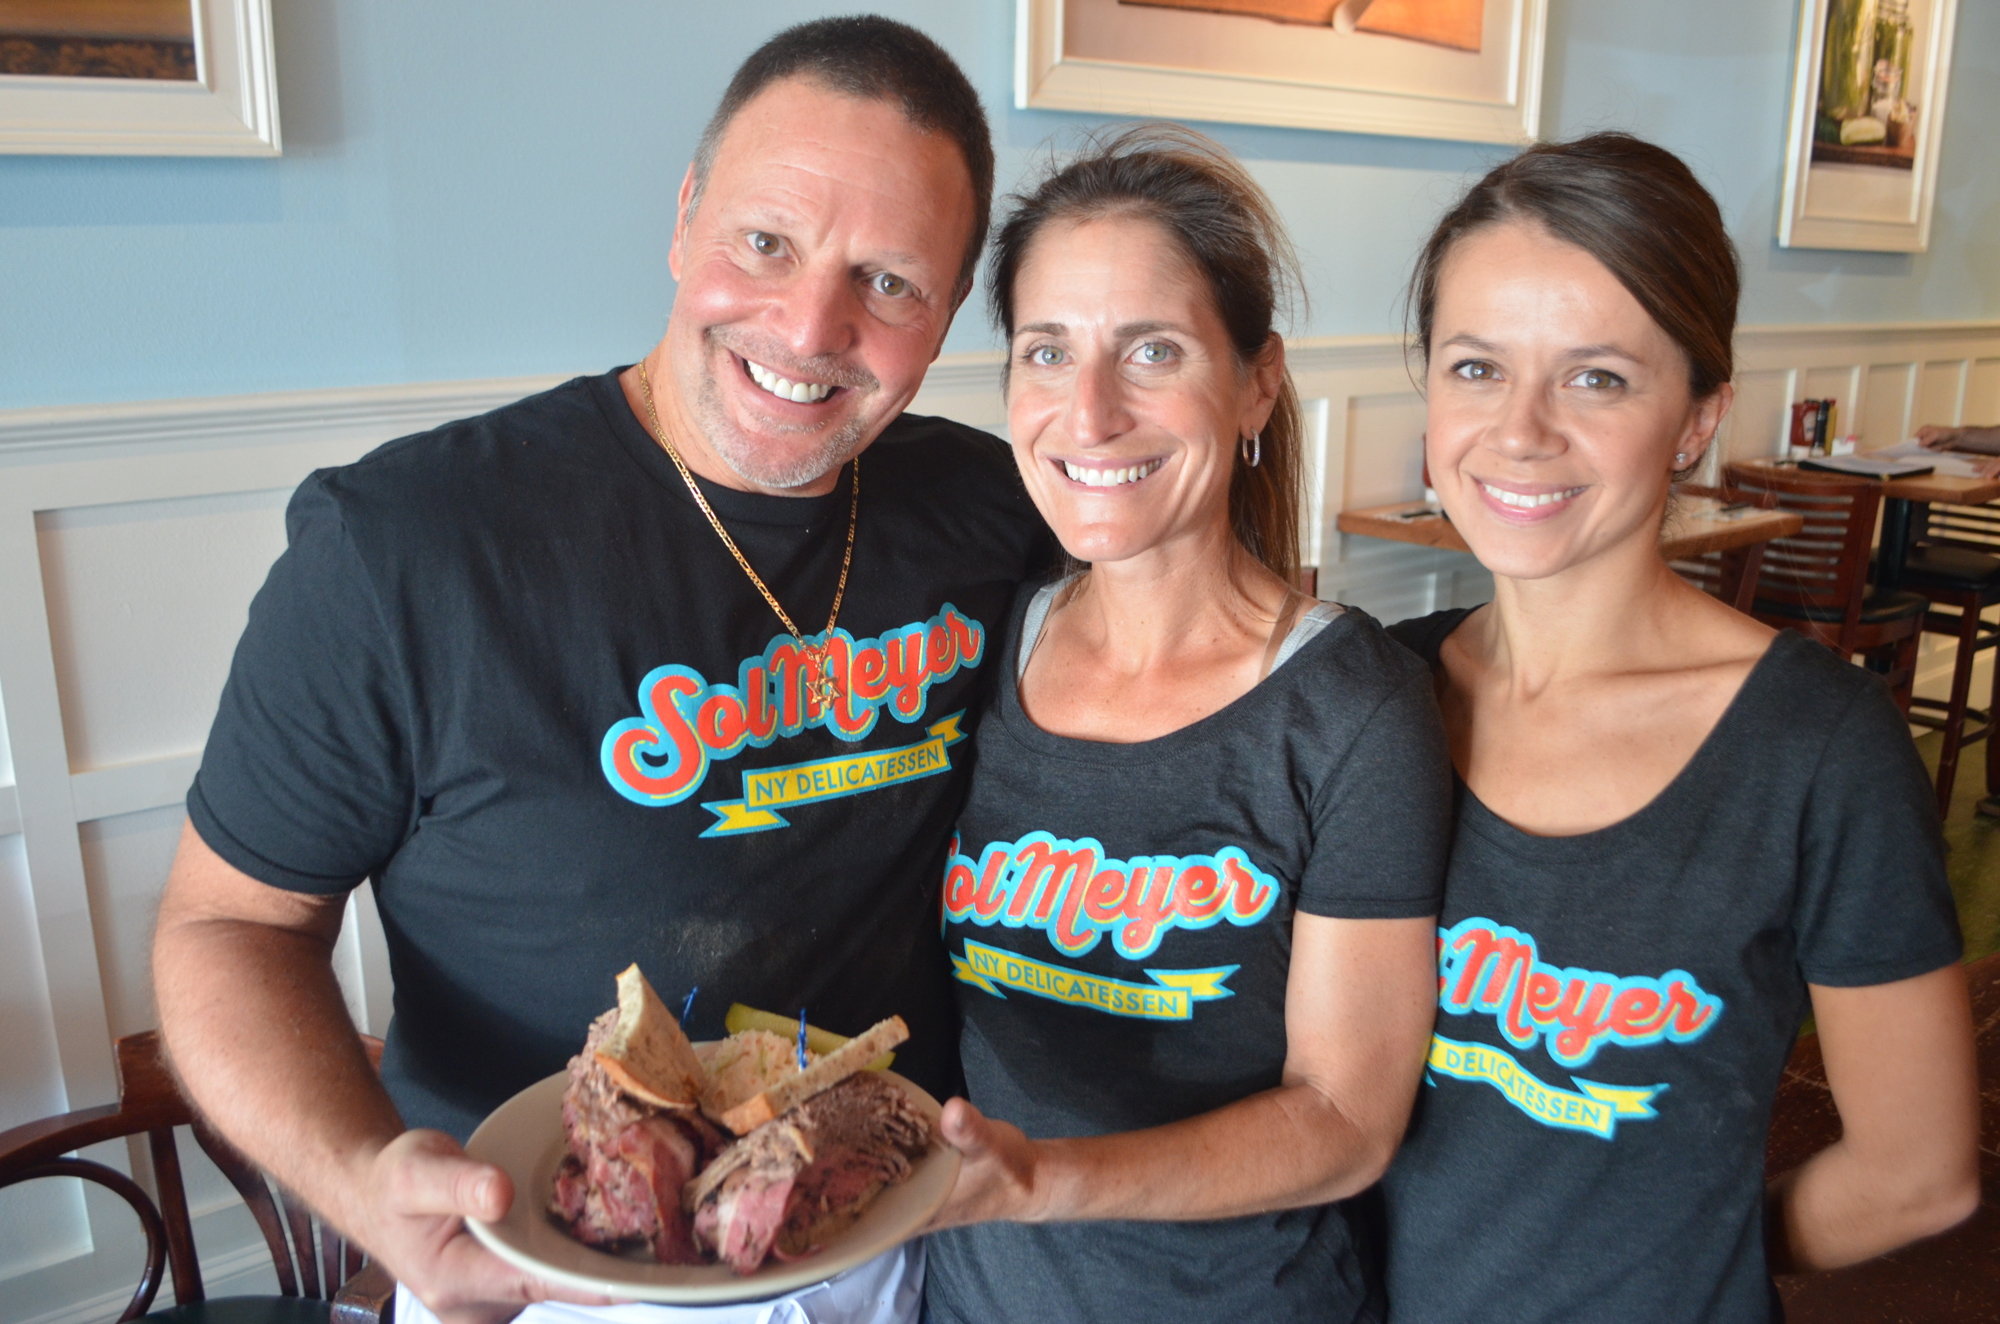 The deli is a family affair with Solomon Shenker, his sister, Samantha Ardenfriend (center), and wife, Marta Shenker,  working in the restaurant.